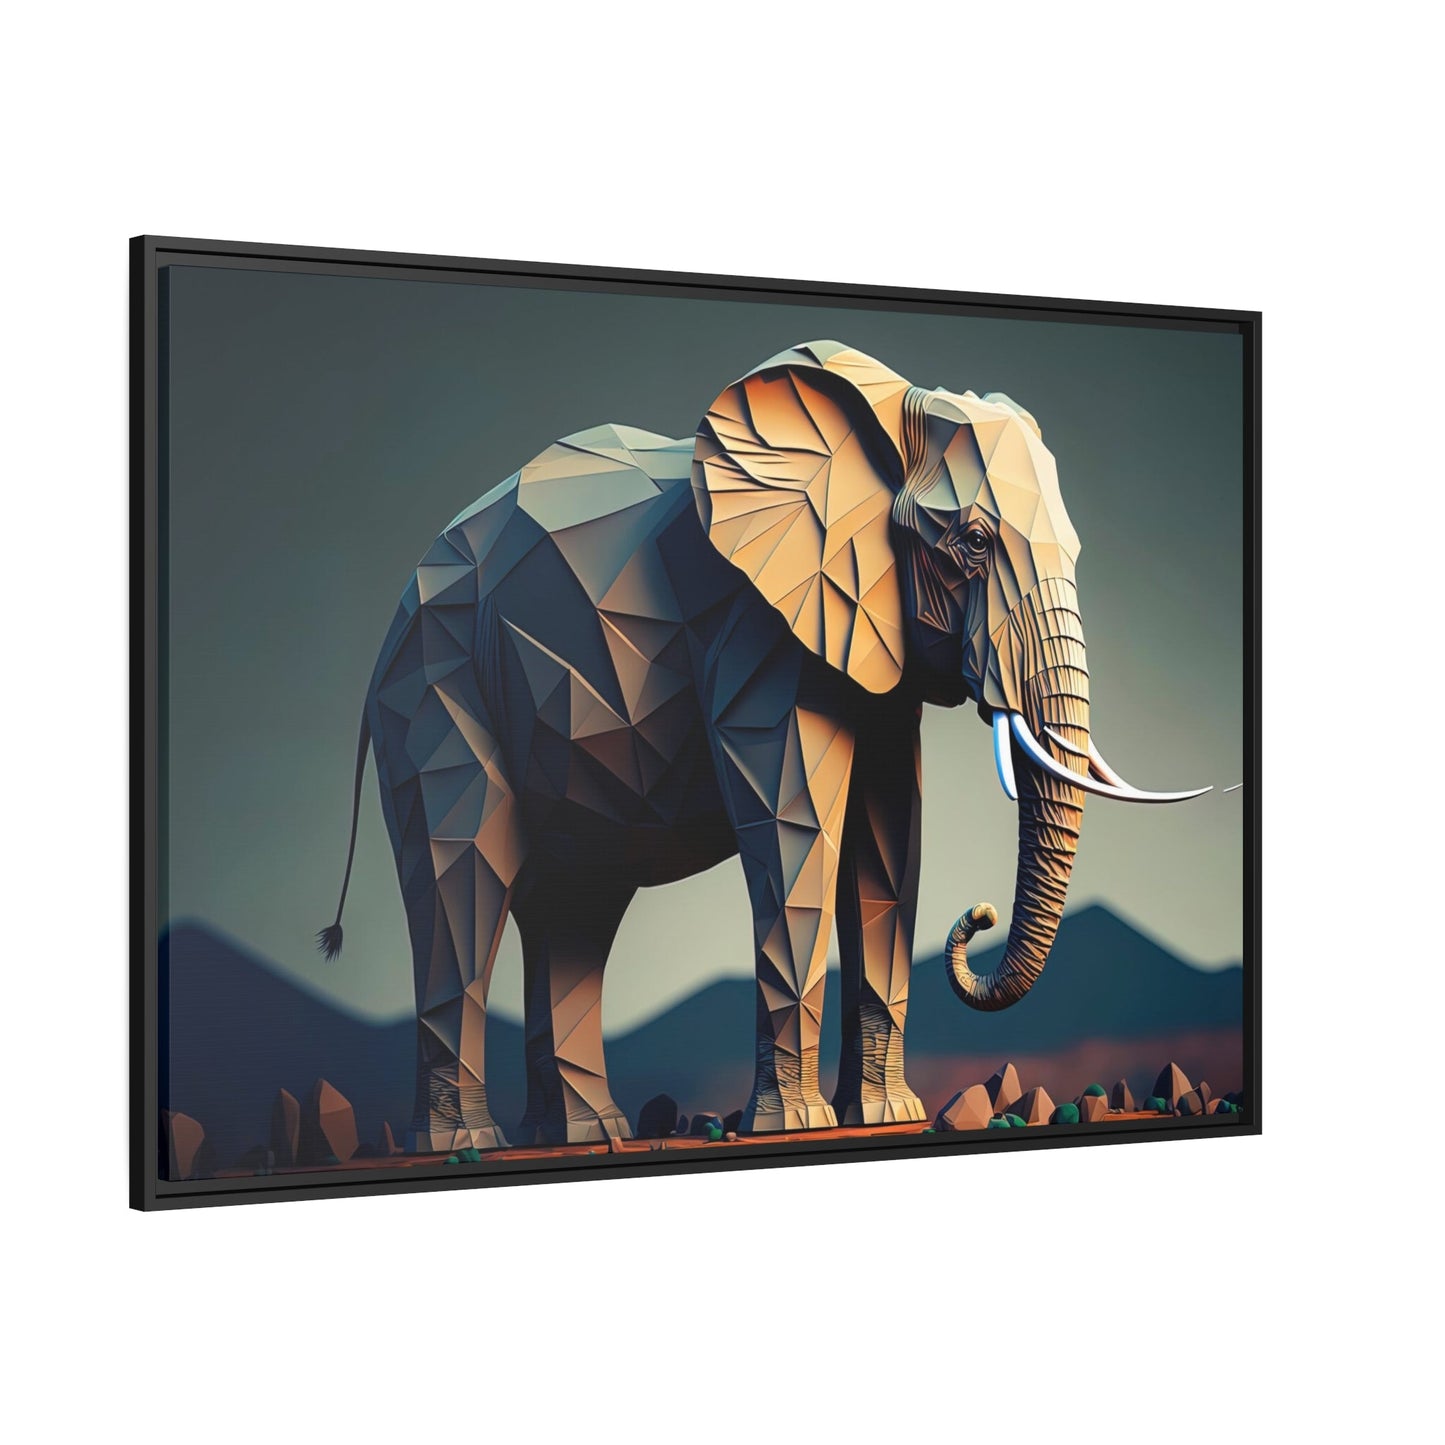 The Gentle Giant: Framed Canvas & Poster Print of an Elephant